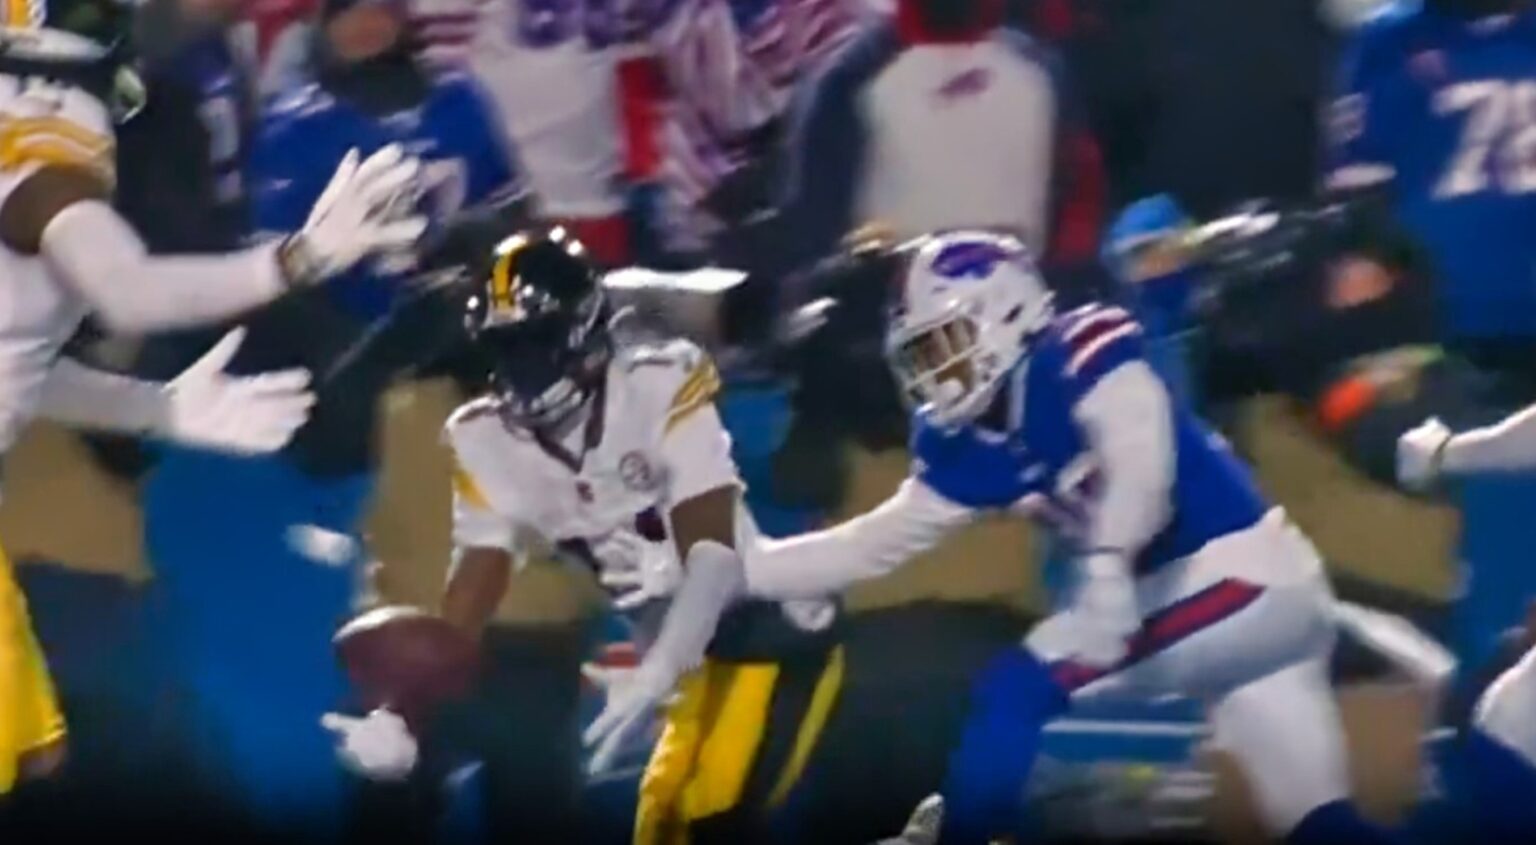 WATCH : Buffalo Bills Fan Hurled a Snowball at George Pickens in an Attempt to Stop Him From Receiving a Touchdown Pass